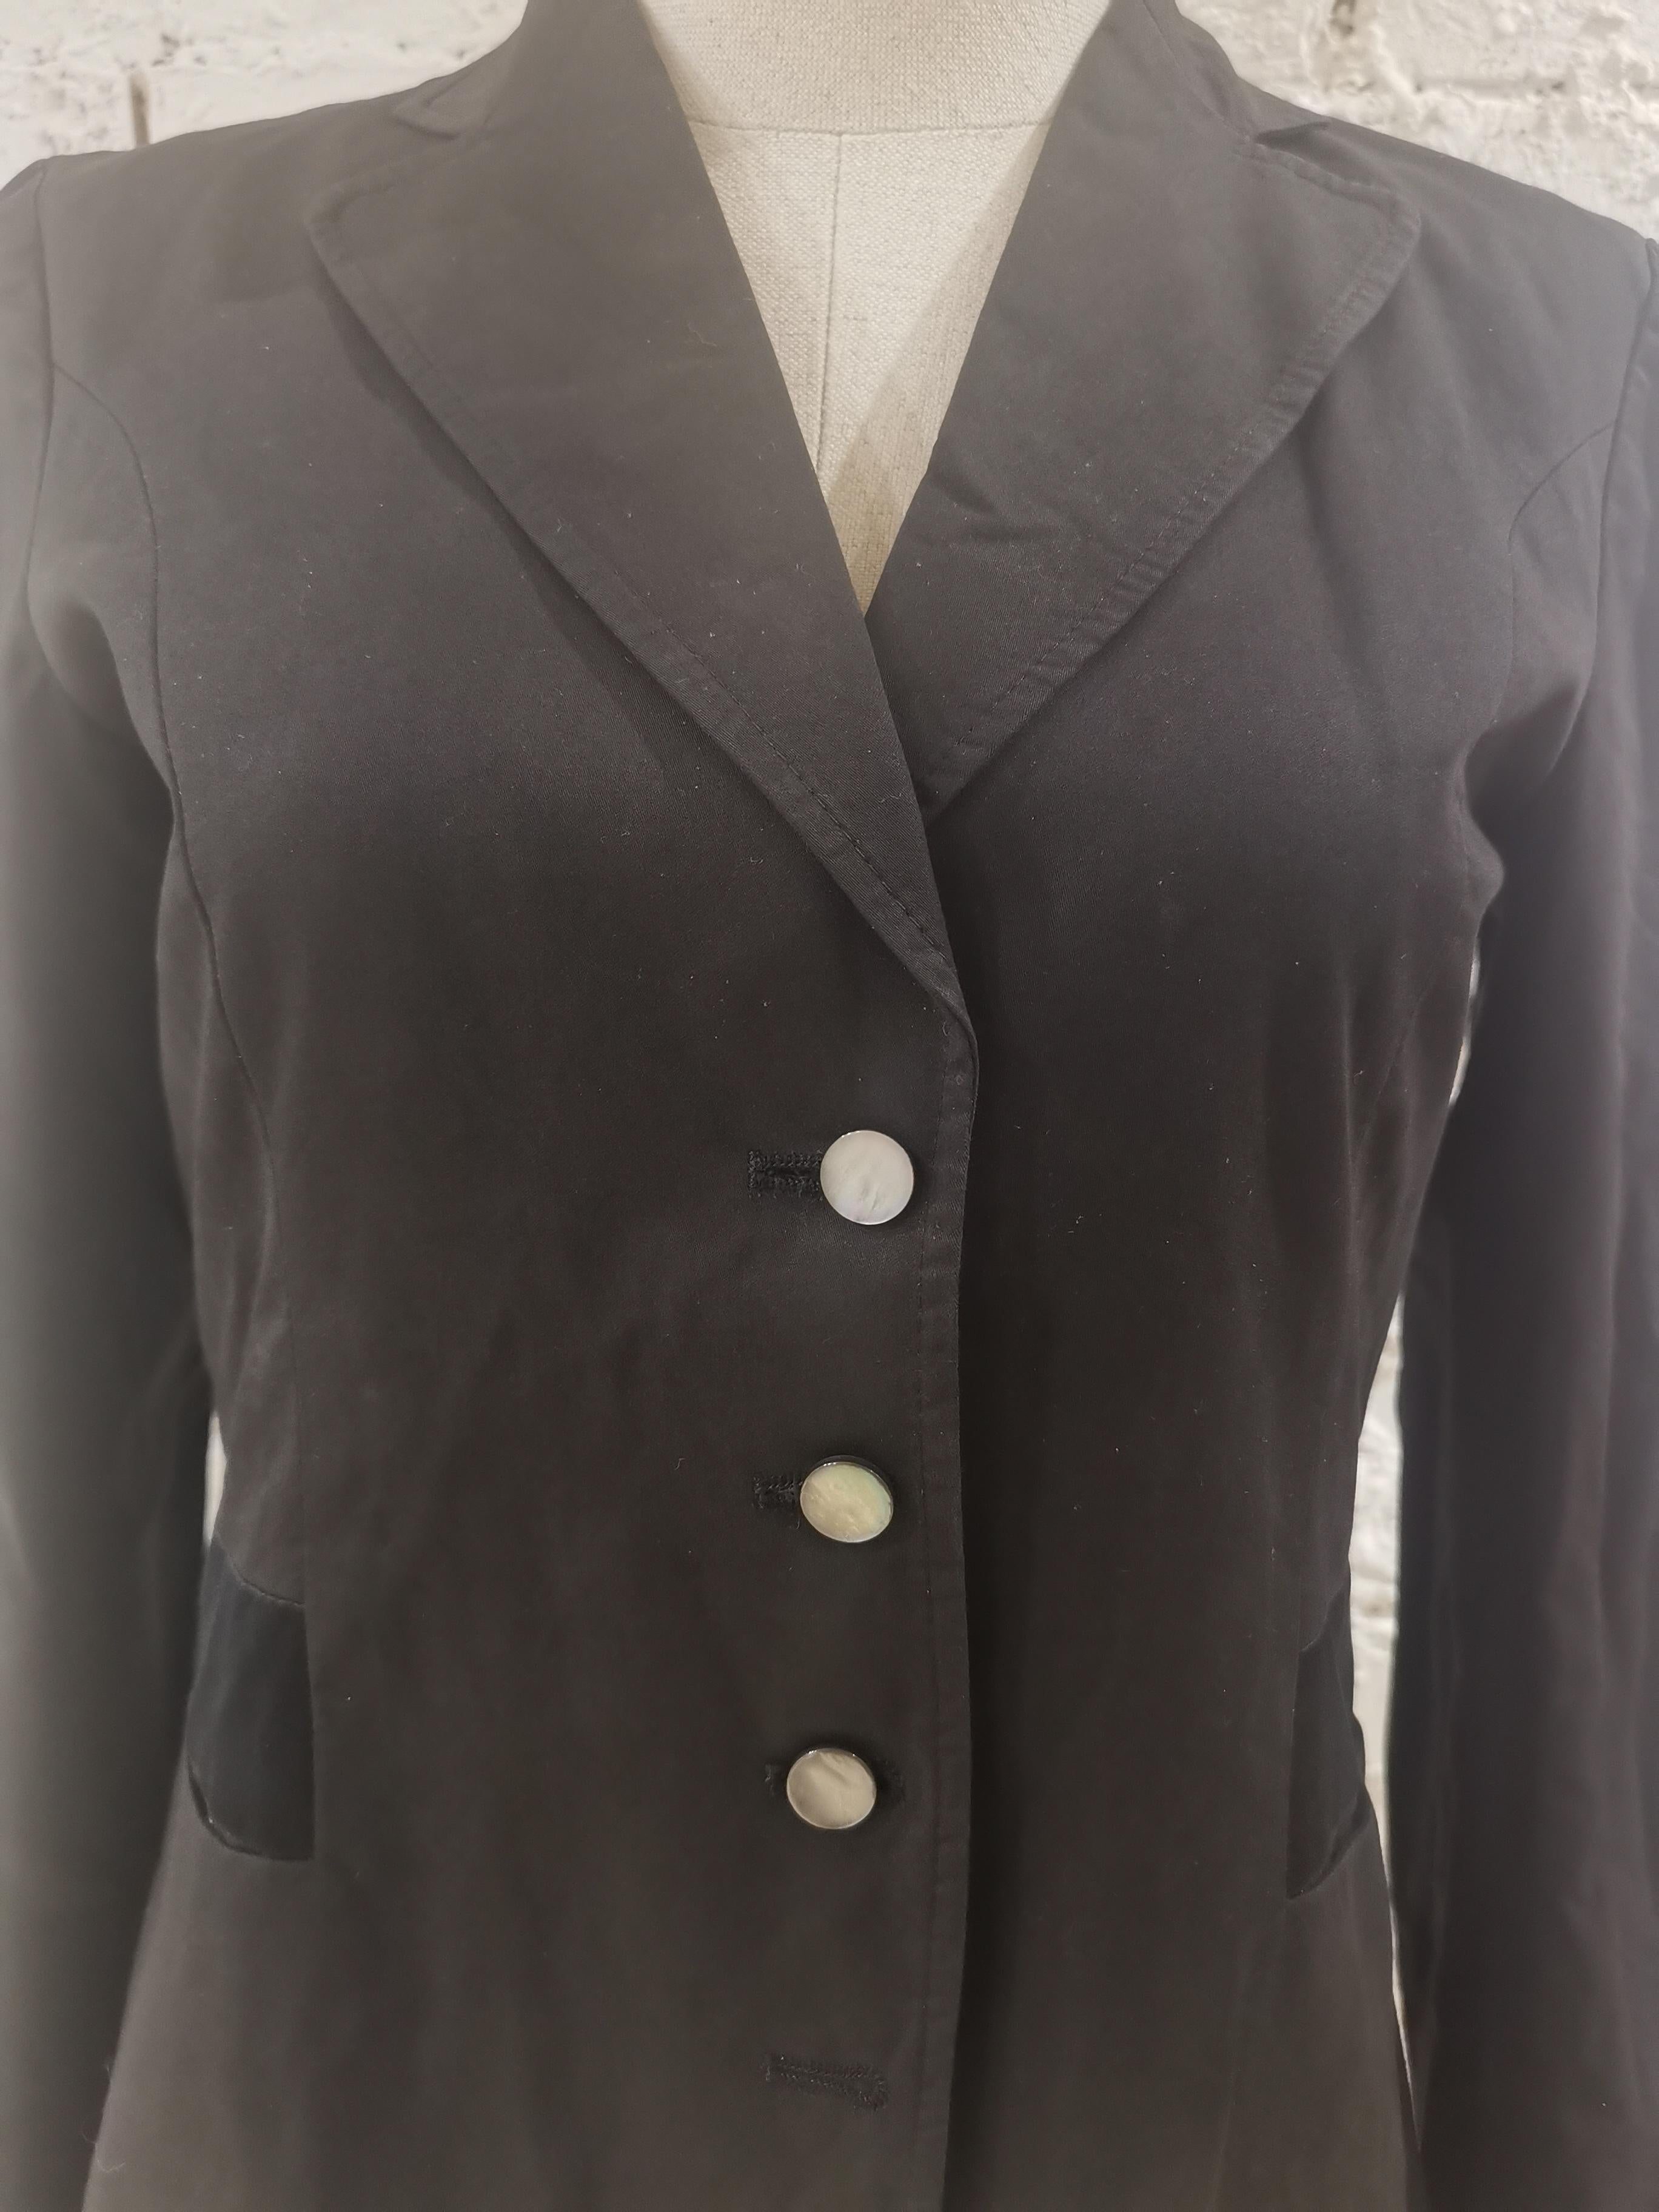 Mauro Grifoni black jacket
totally made in italy size M 